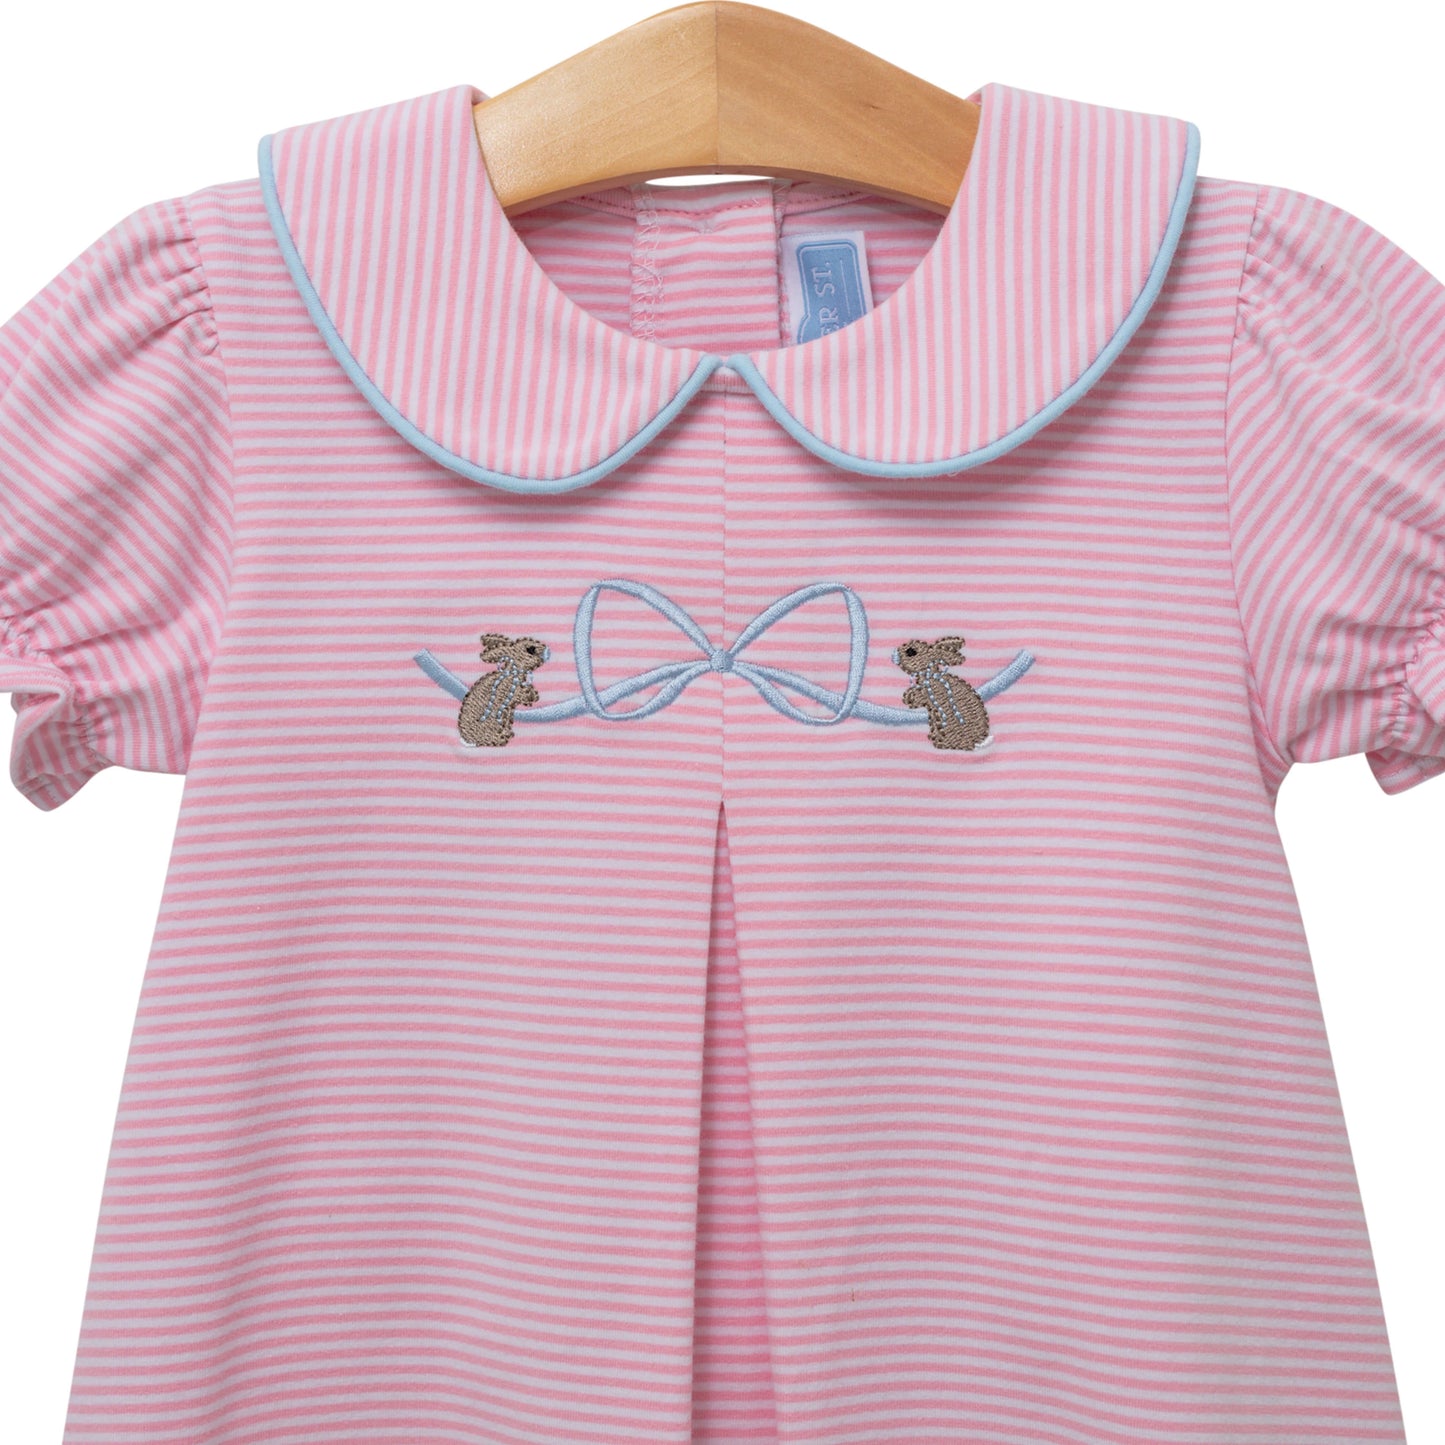 Trotter Street - Bunny Embroidery Bloomer Set